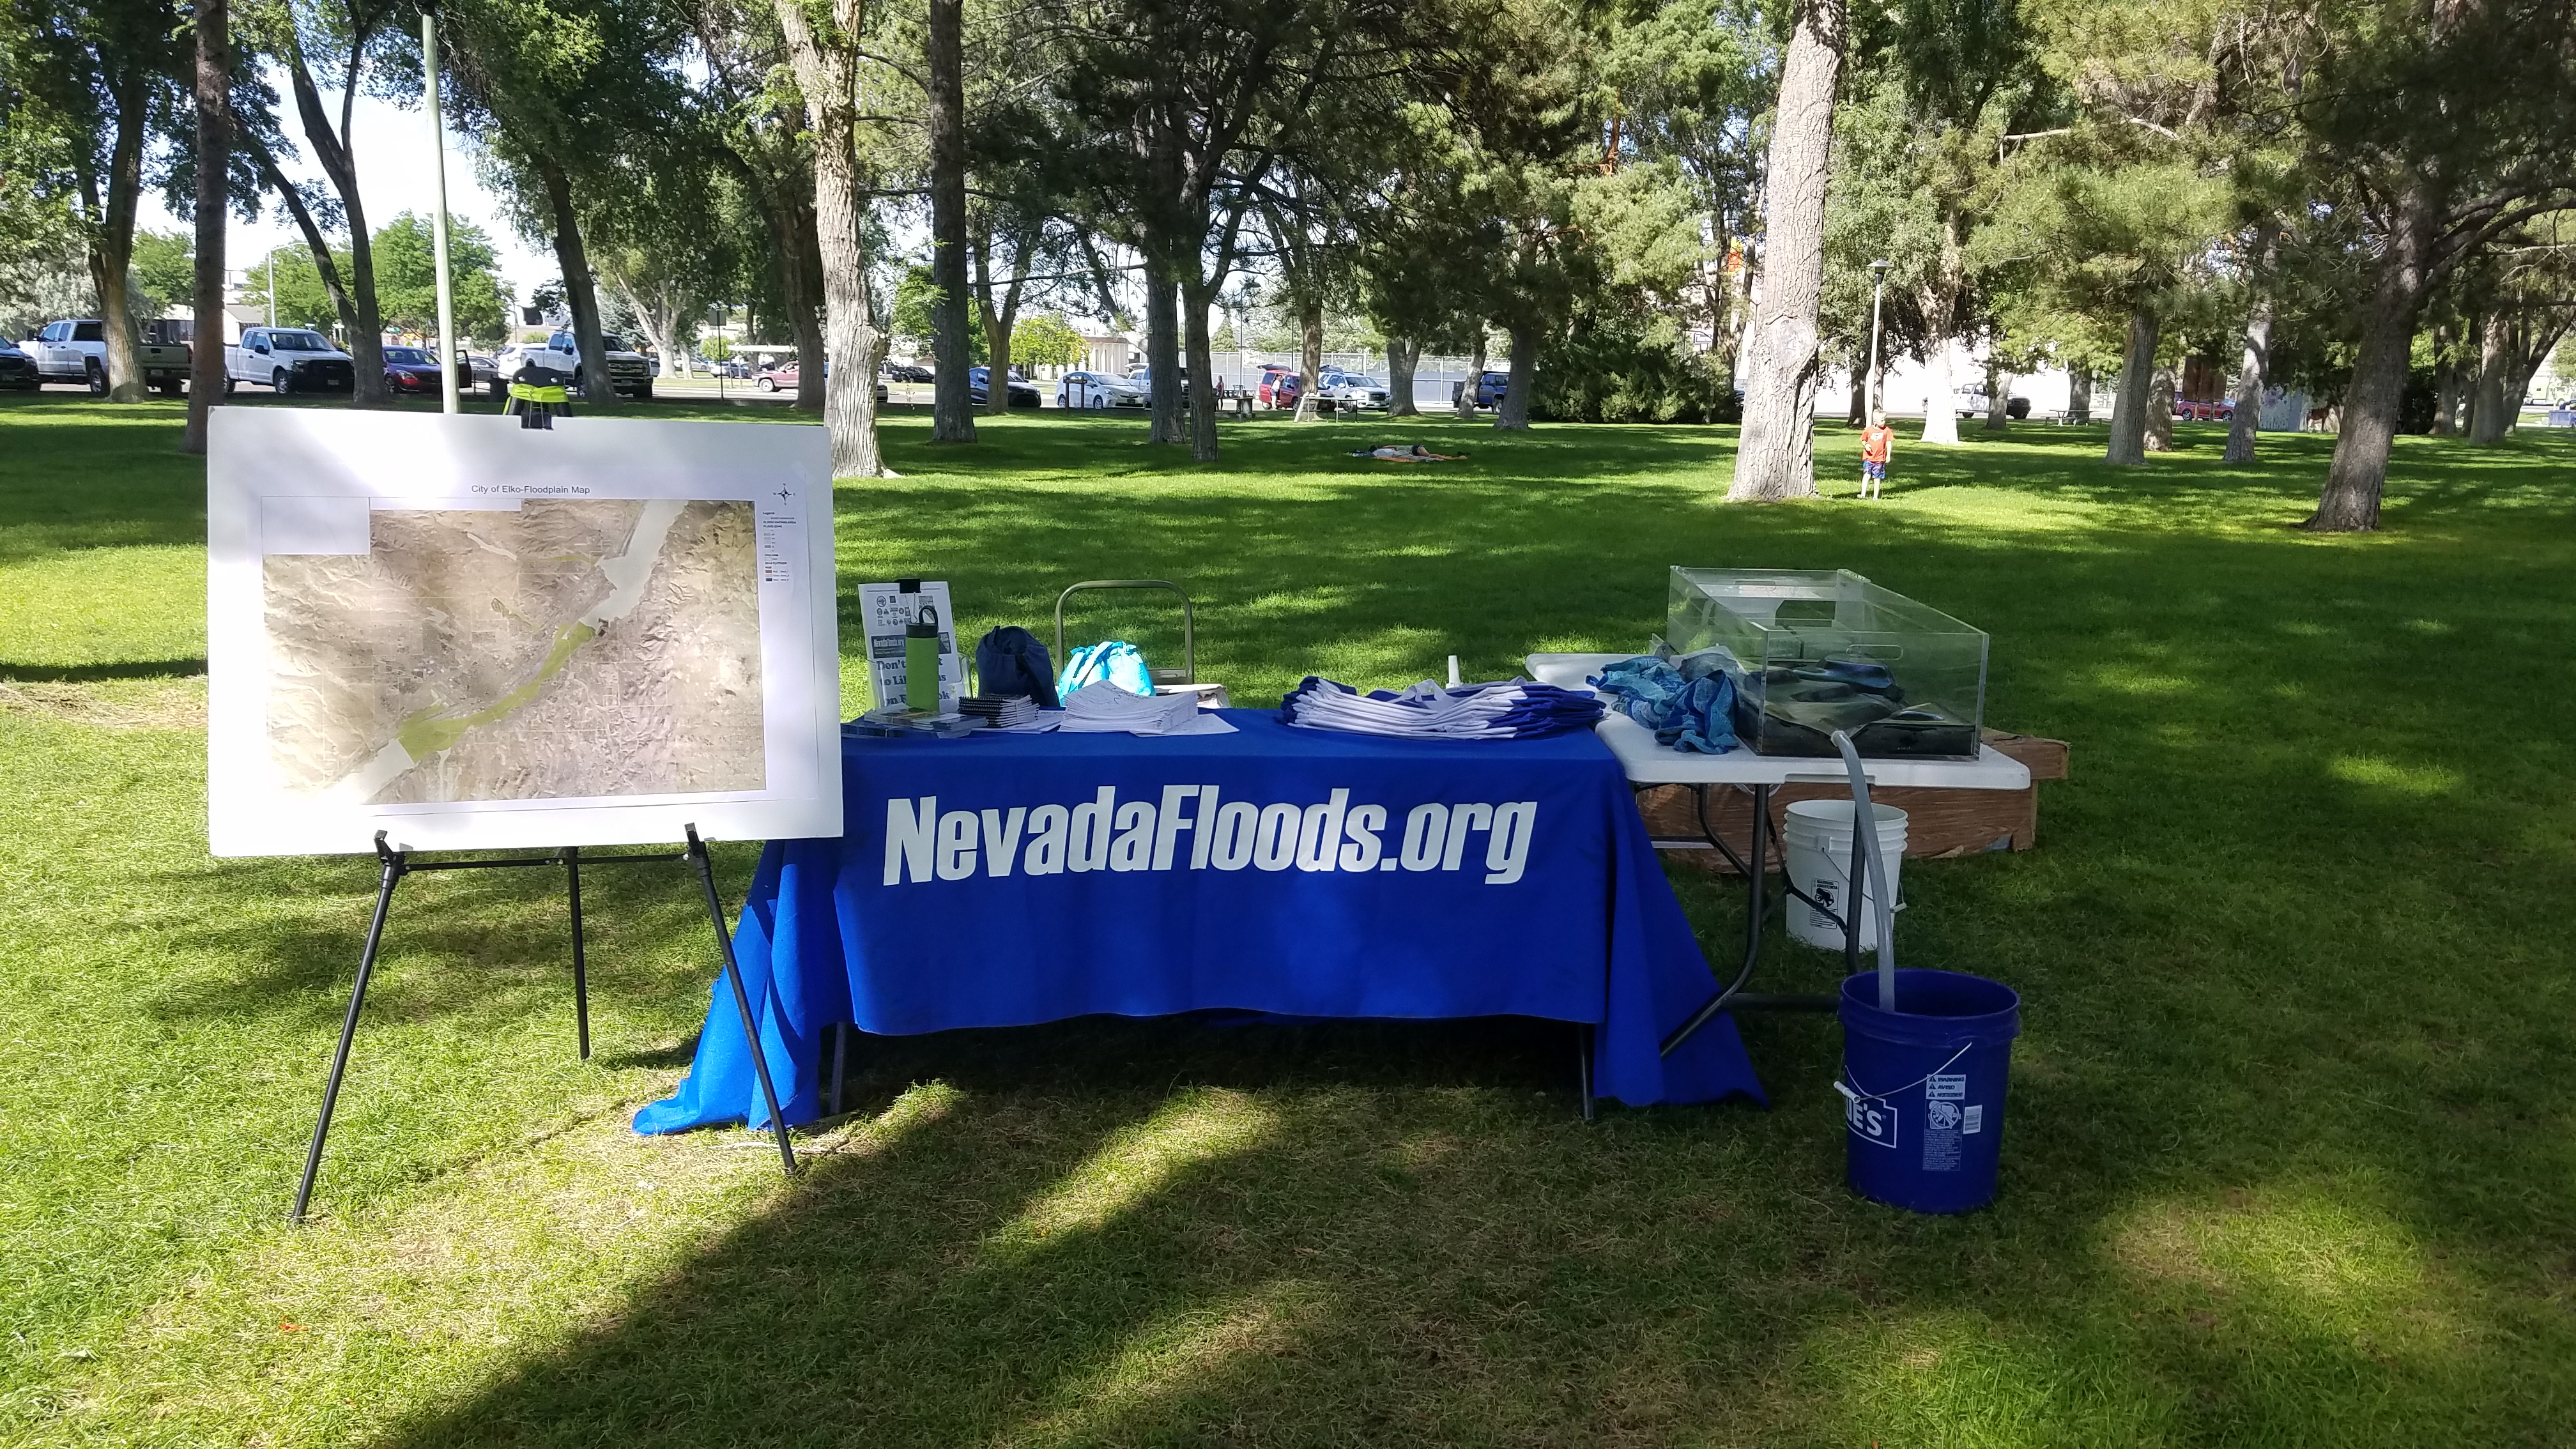 A photo image of the Nevada Floods outreach booth before an event. The booth consists of a blue table cloth that reads Nevadafloods.org and has outreach materials resting on it. The flooding simulation model is sitting on an adjacent table.